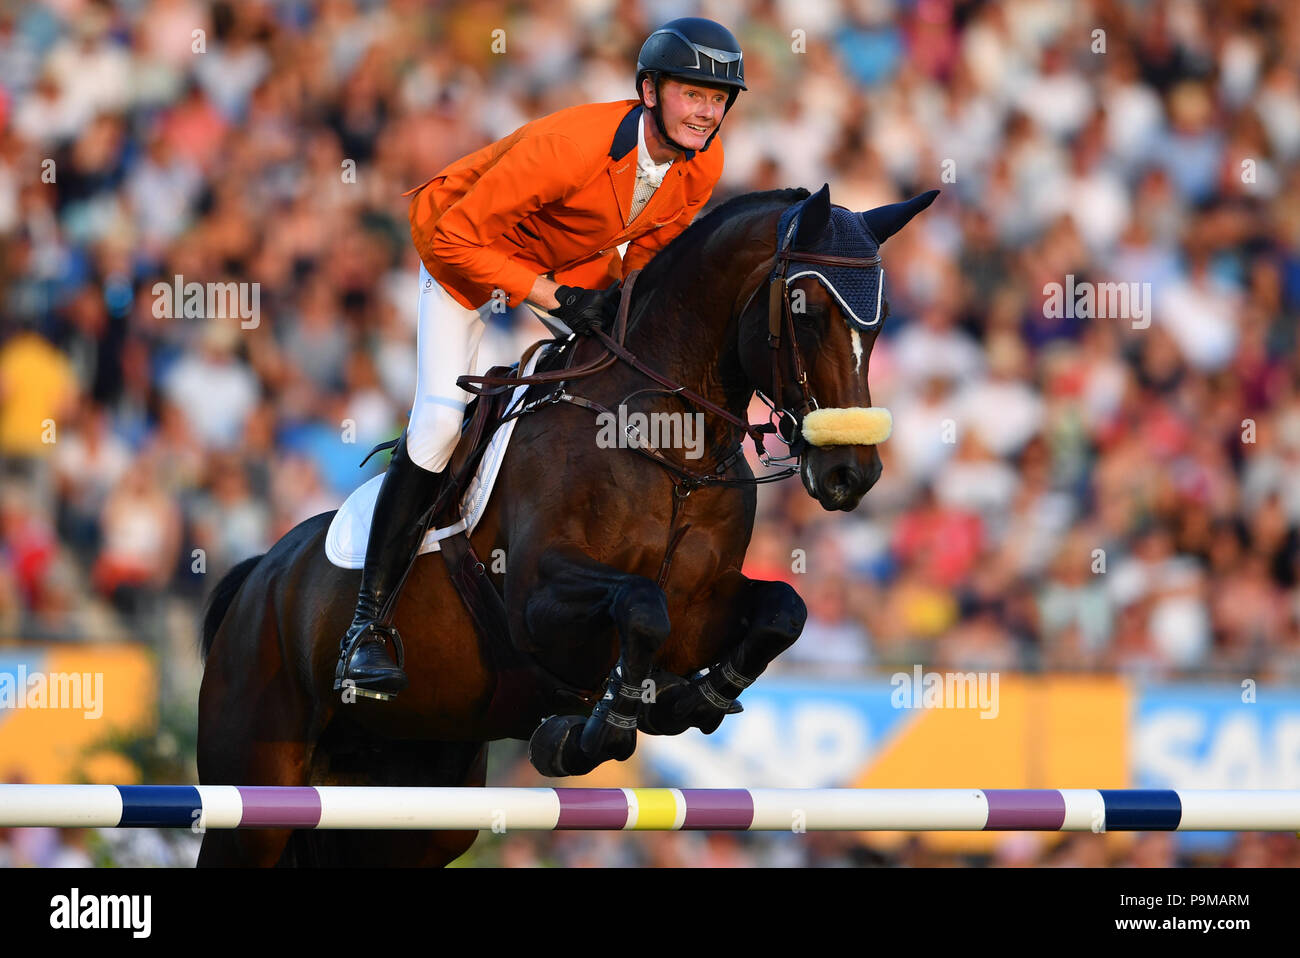 Aachen, Germany. 19th July, 2018. CHIO, equestrian, show jumping. The Dutch  rider Frank Schutter on the horse Chianti's Champion jumping over a  barrier. Credit: Uwe Anspach/dpa/Alamy Live News Stock Photo - Alamy